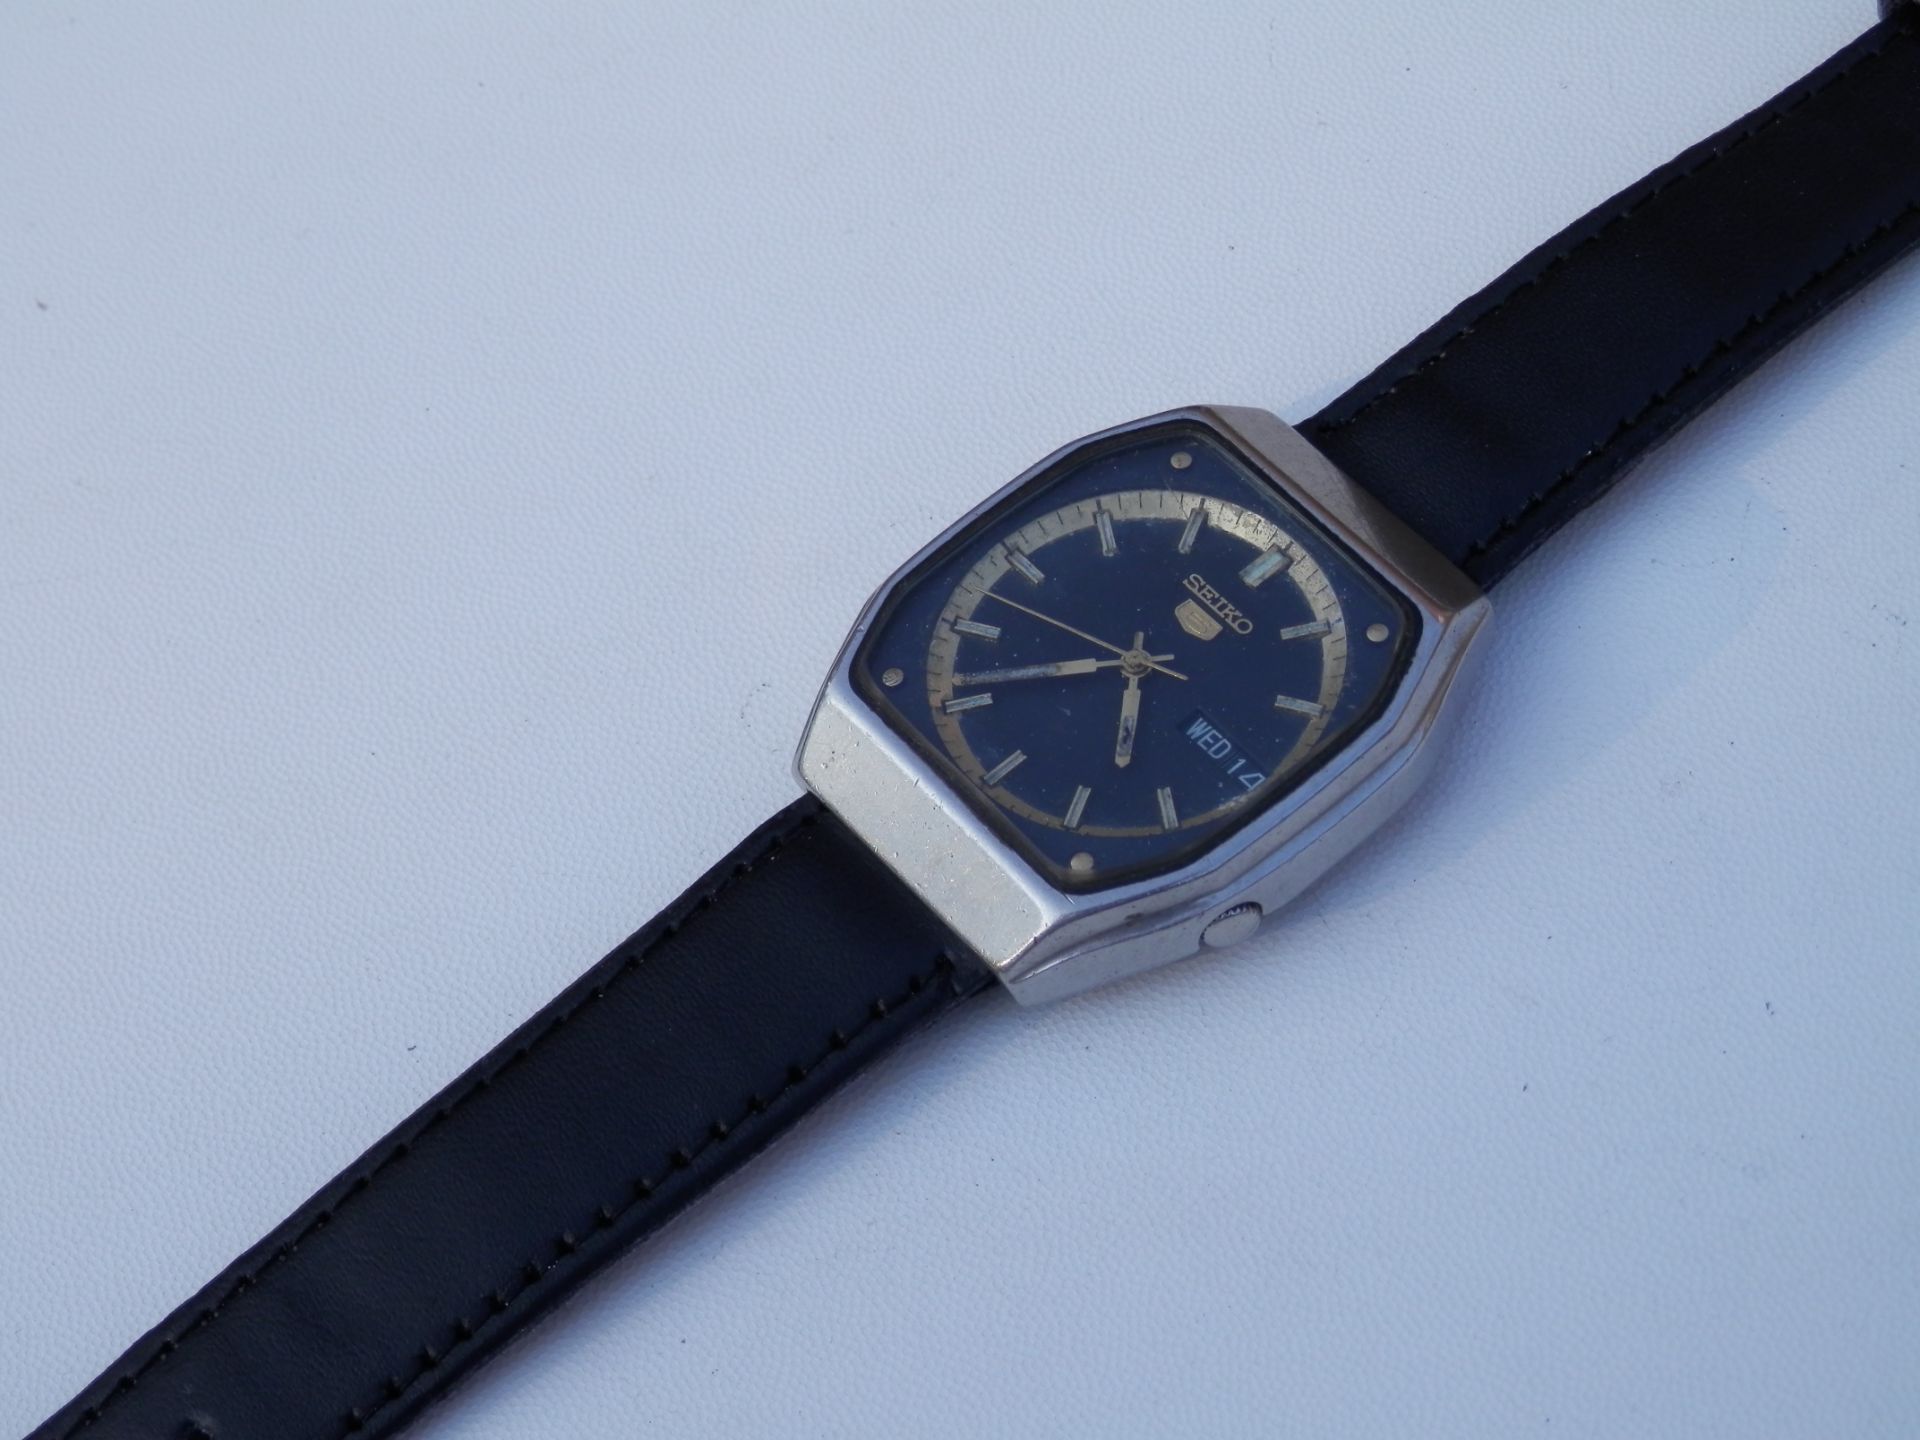 1981 SEIKO 5 AUTOMATIC DAY & DATE JEWELLED WATCH, BLACK & GOLD DIAL, RARE WORKING WATCH - Image 3 of 11